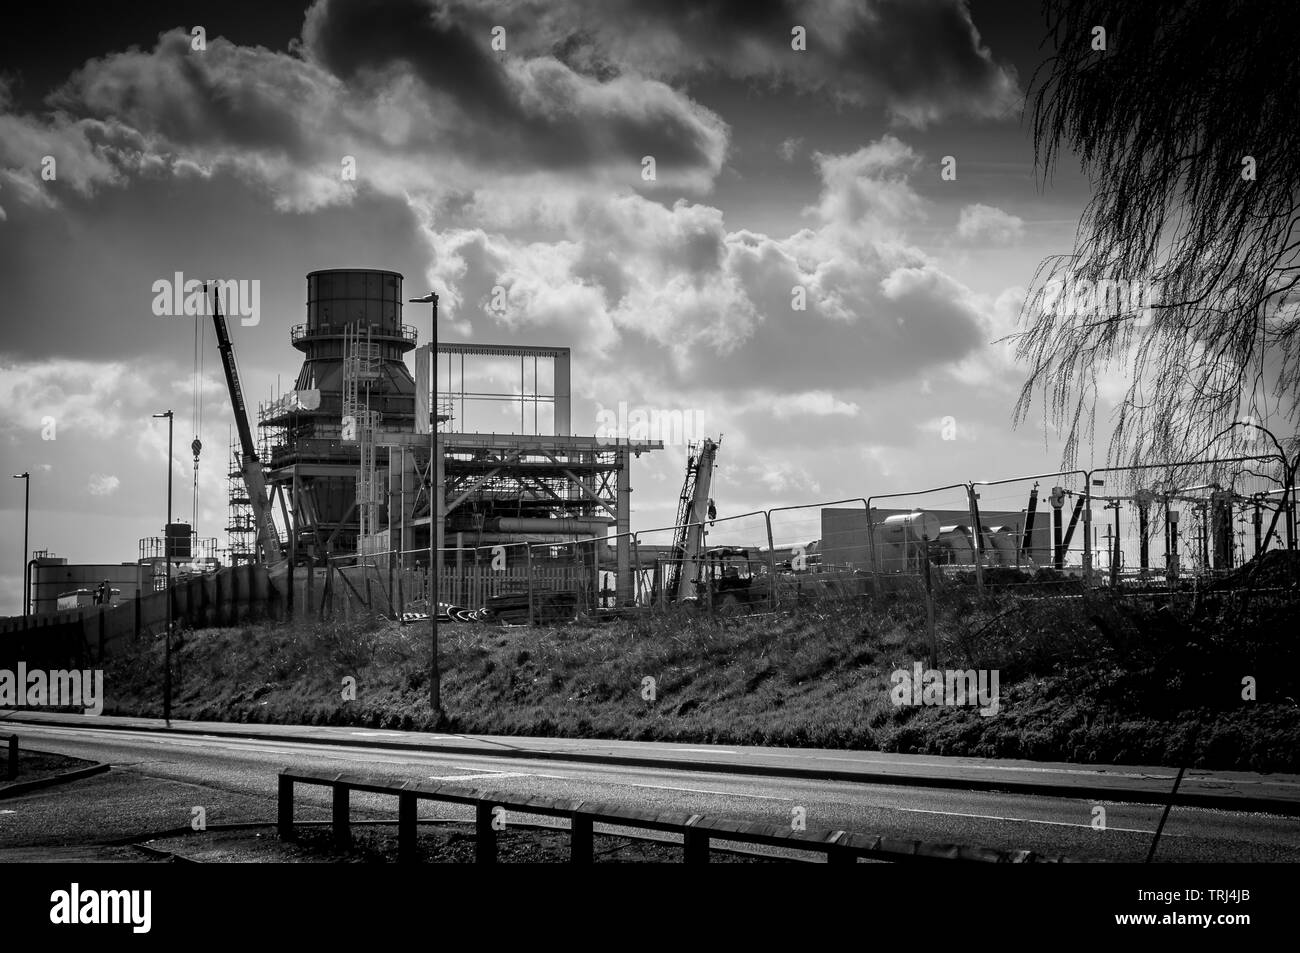 Construction of a new power plant in Spalding, Lincolnshire, UK Stock Photo